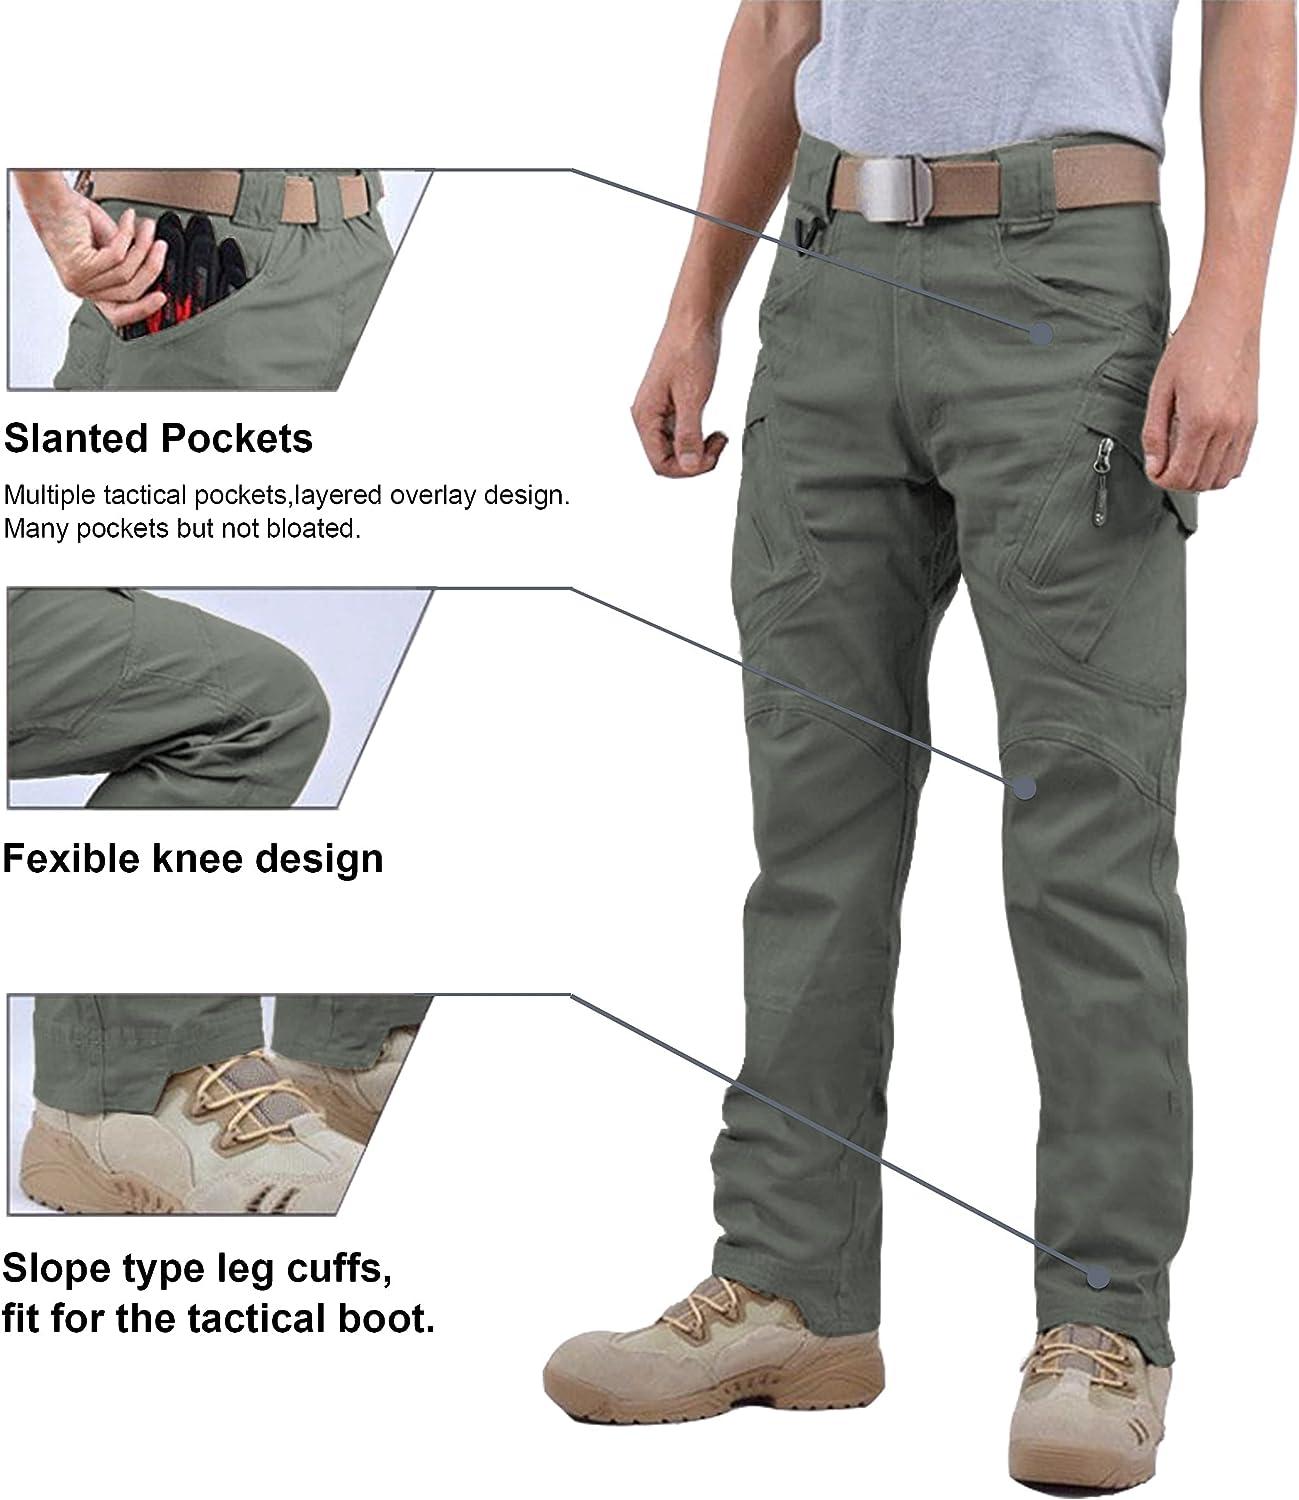 Buy Regular Trousers White and Olive Green Combo of 2 Cotton for Best  Price, Reviews, Free Shipping